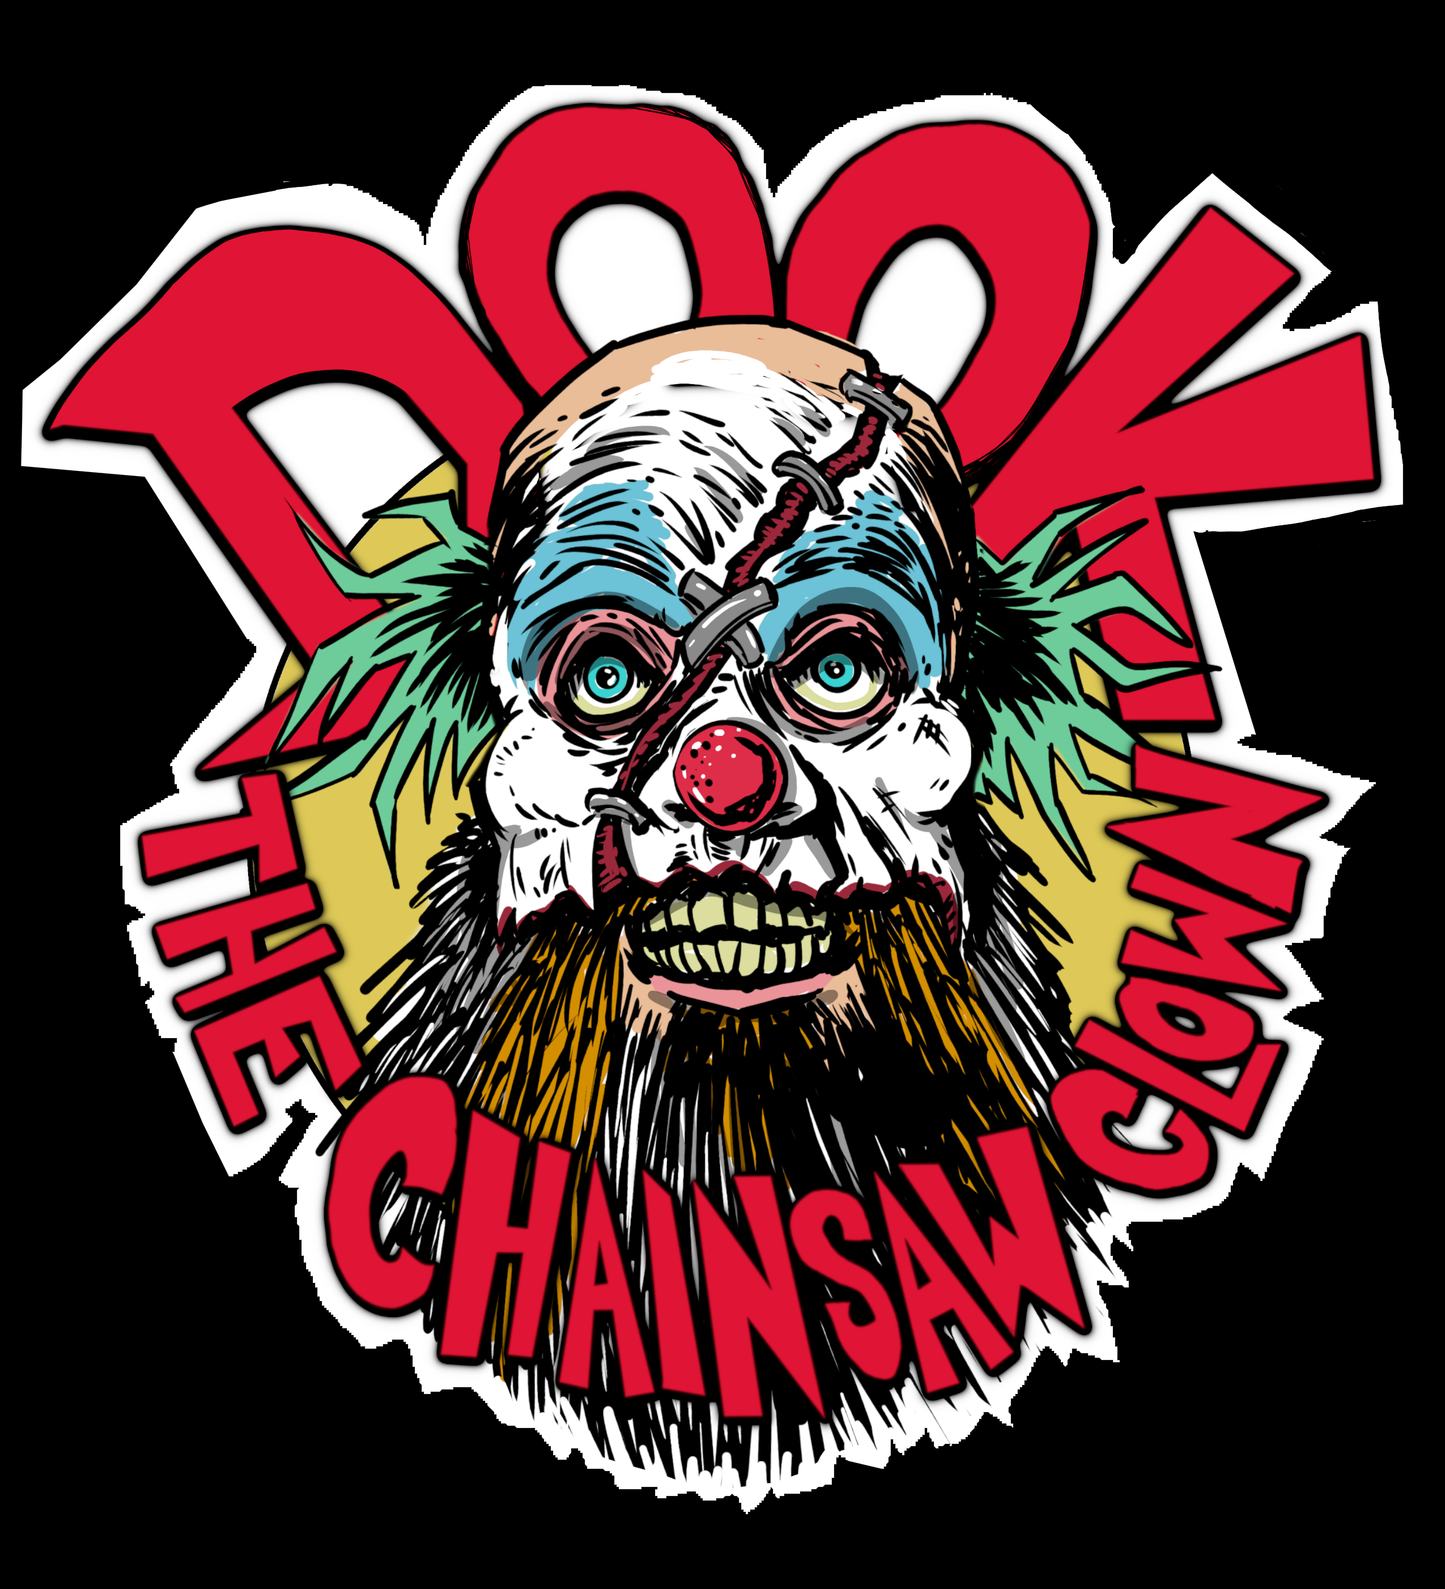 Teddy Told Me To - Dook the Chainsaw Clown Unisex T-Shirt